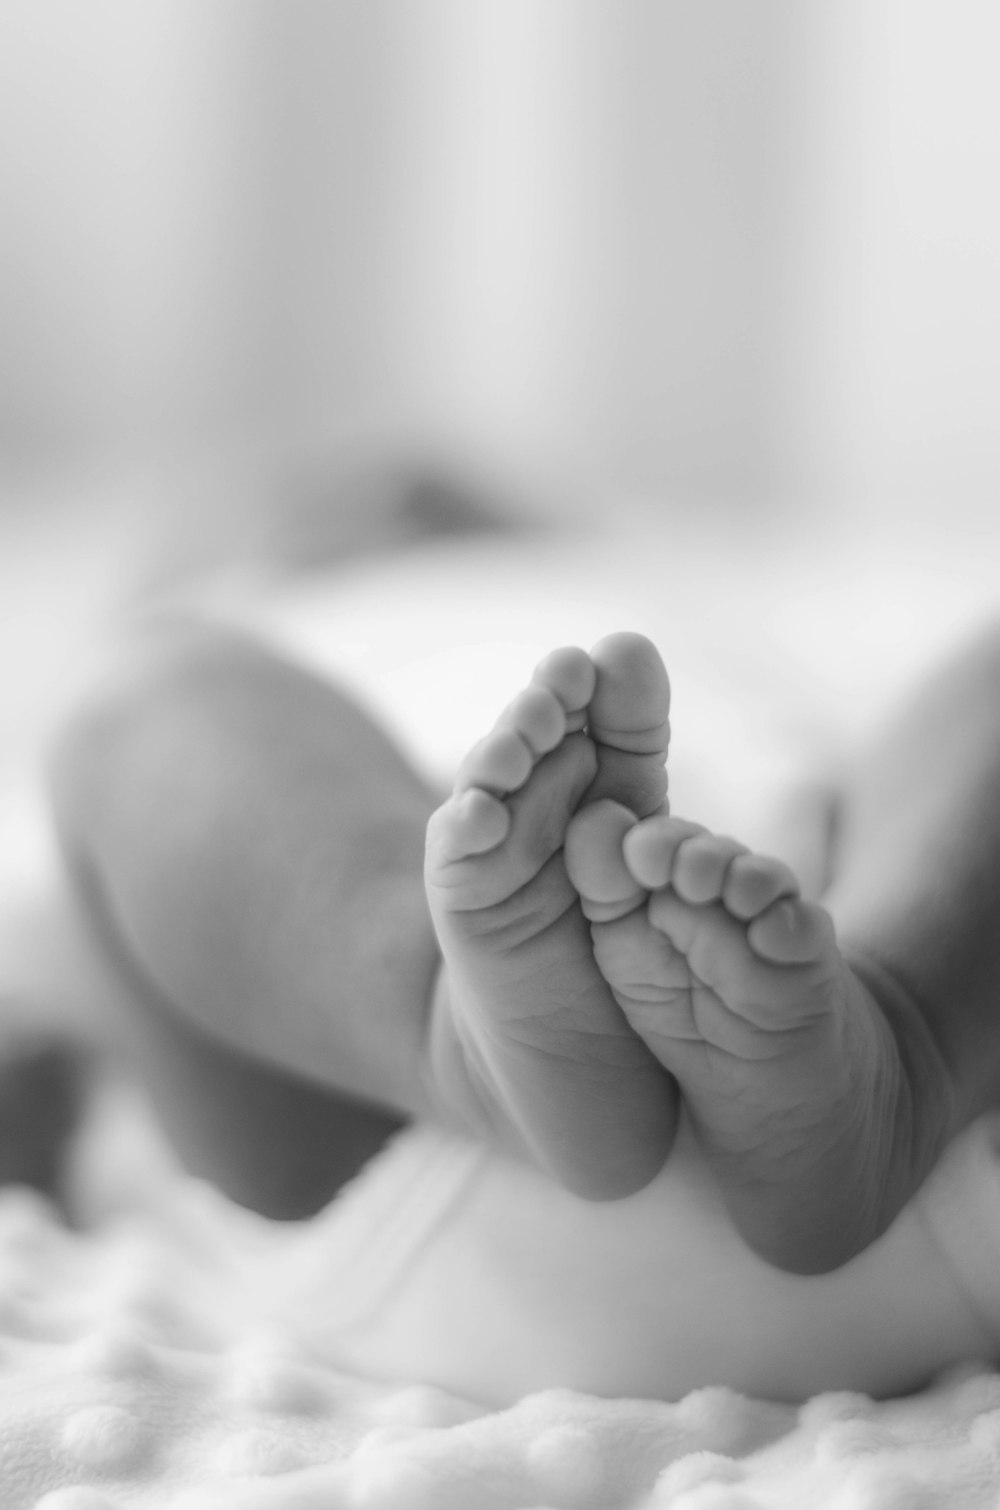 500+ Baby Feet Pictures | Download Free Images on Unsplash